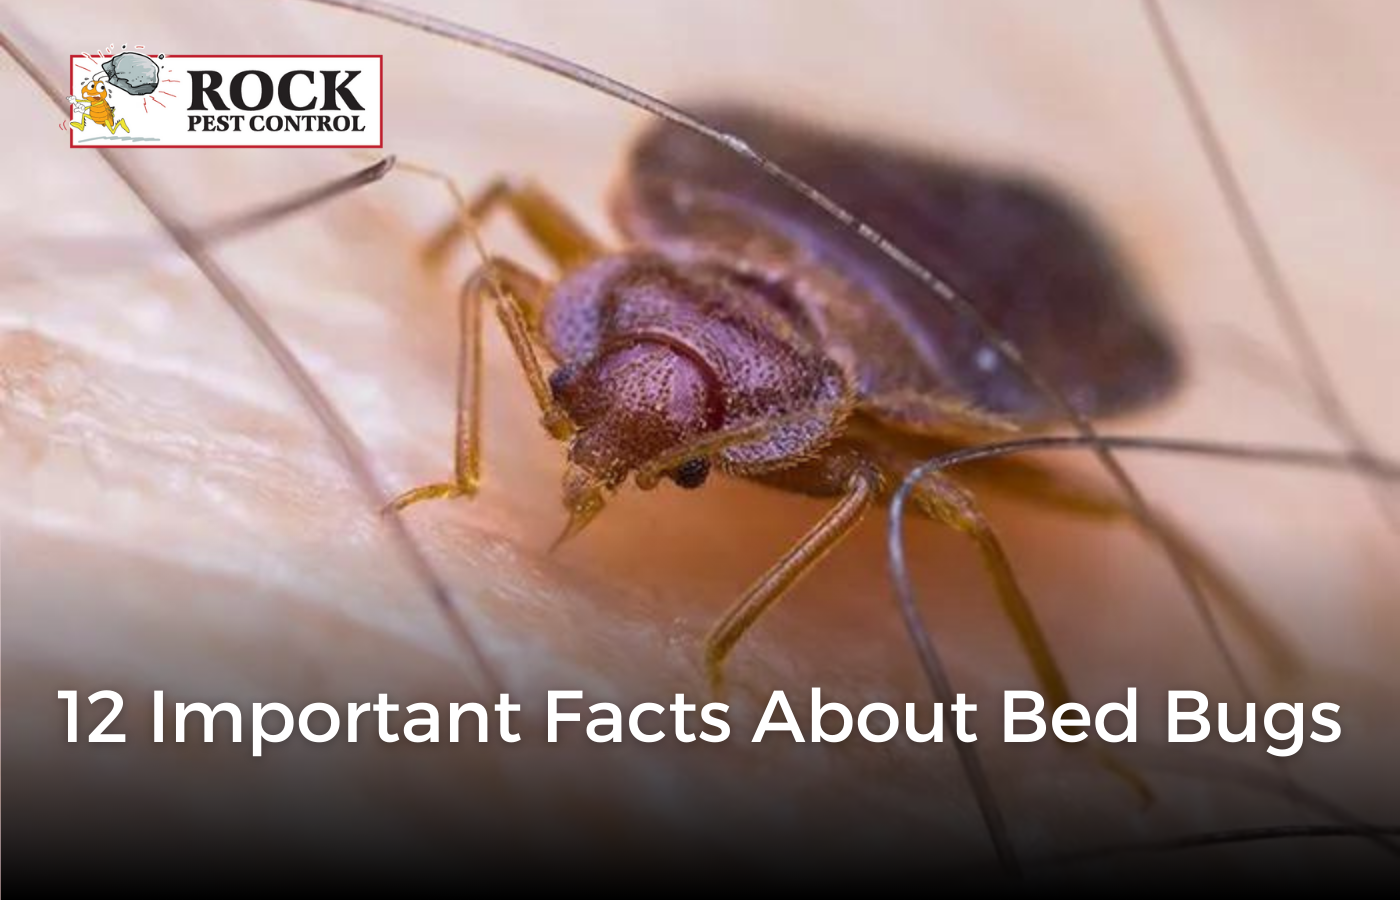 12 Important Facts About Bed Bugs